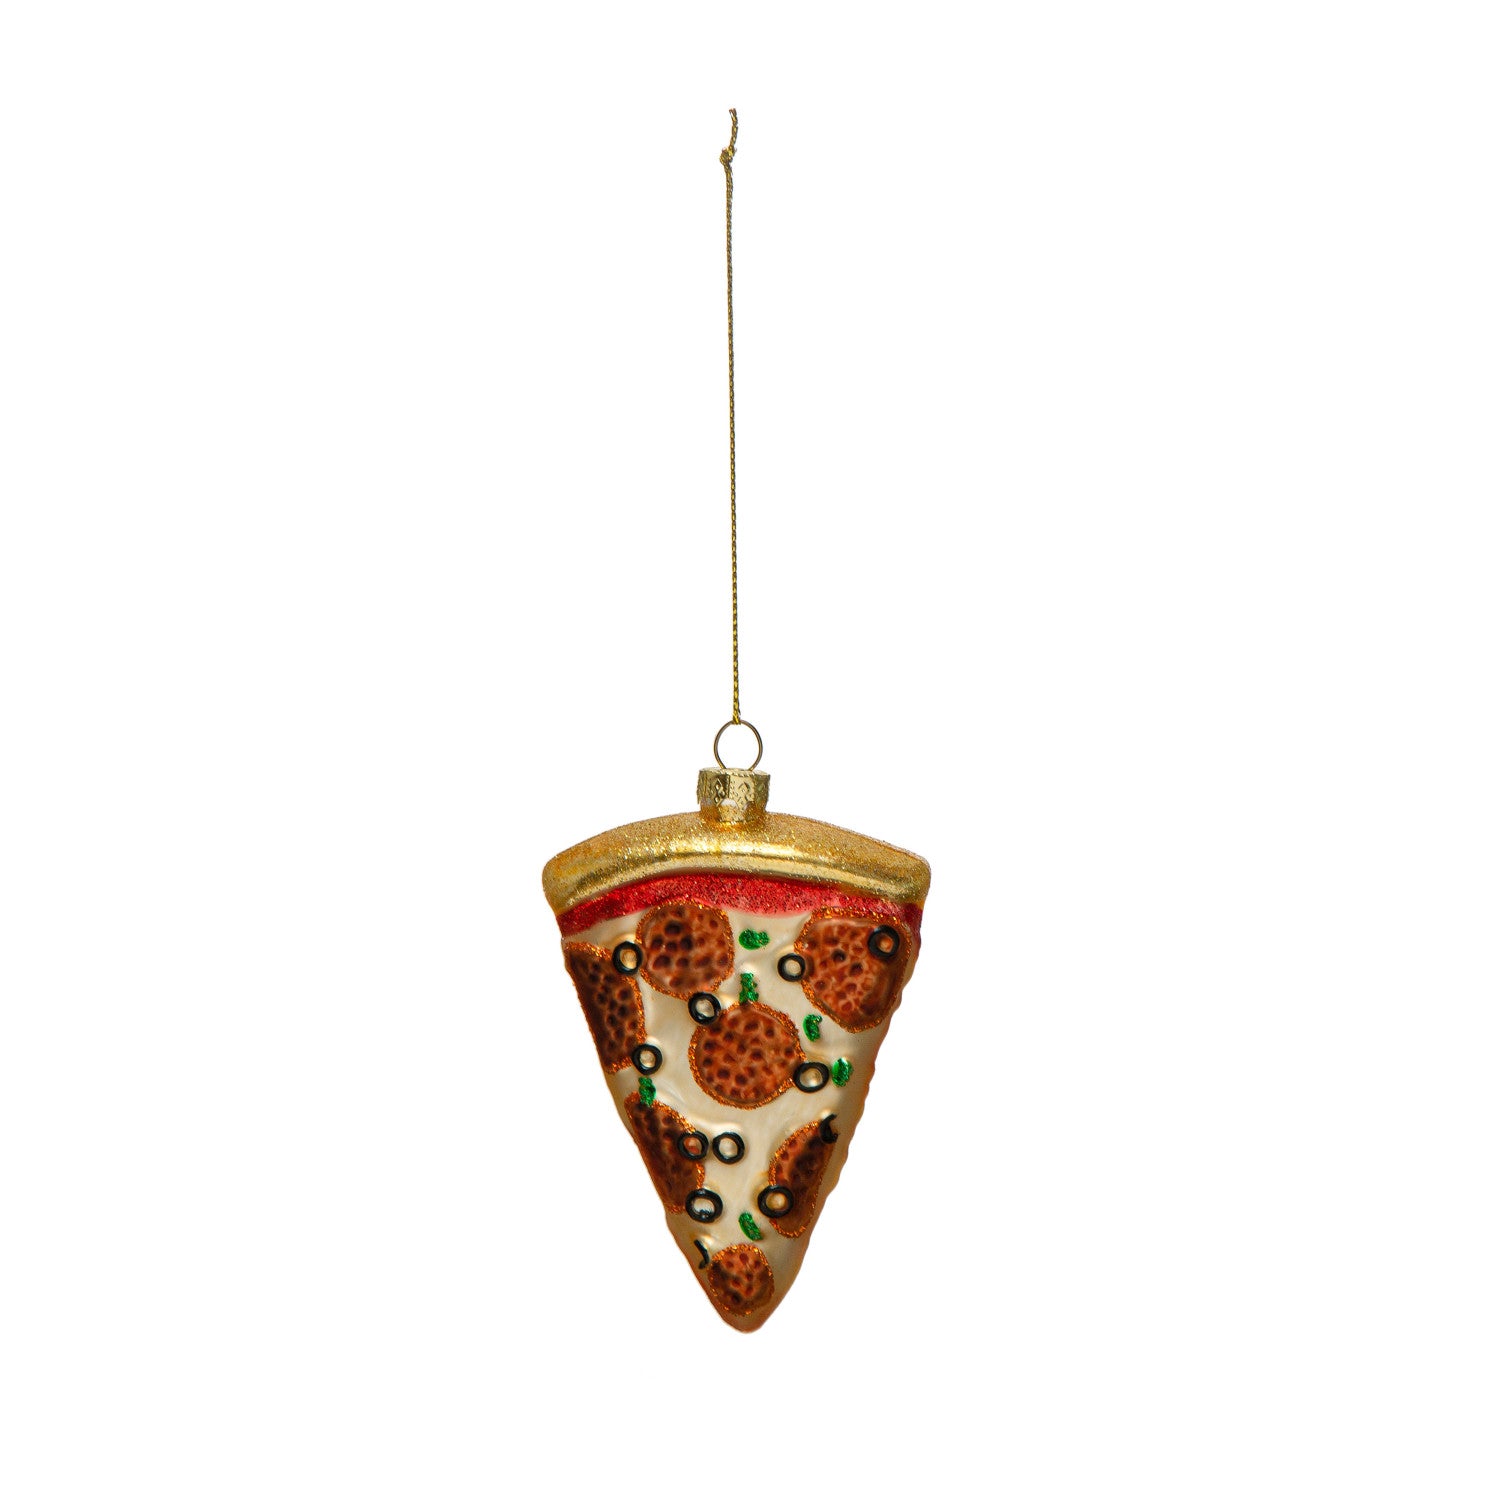 Hand Painted Pizza Slice